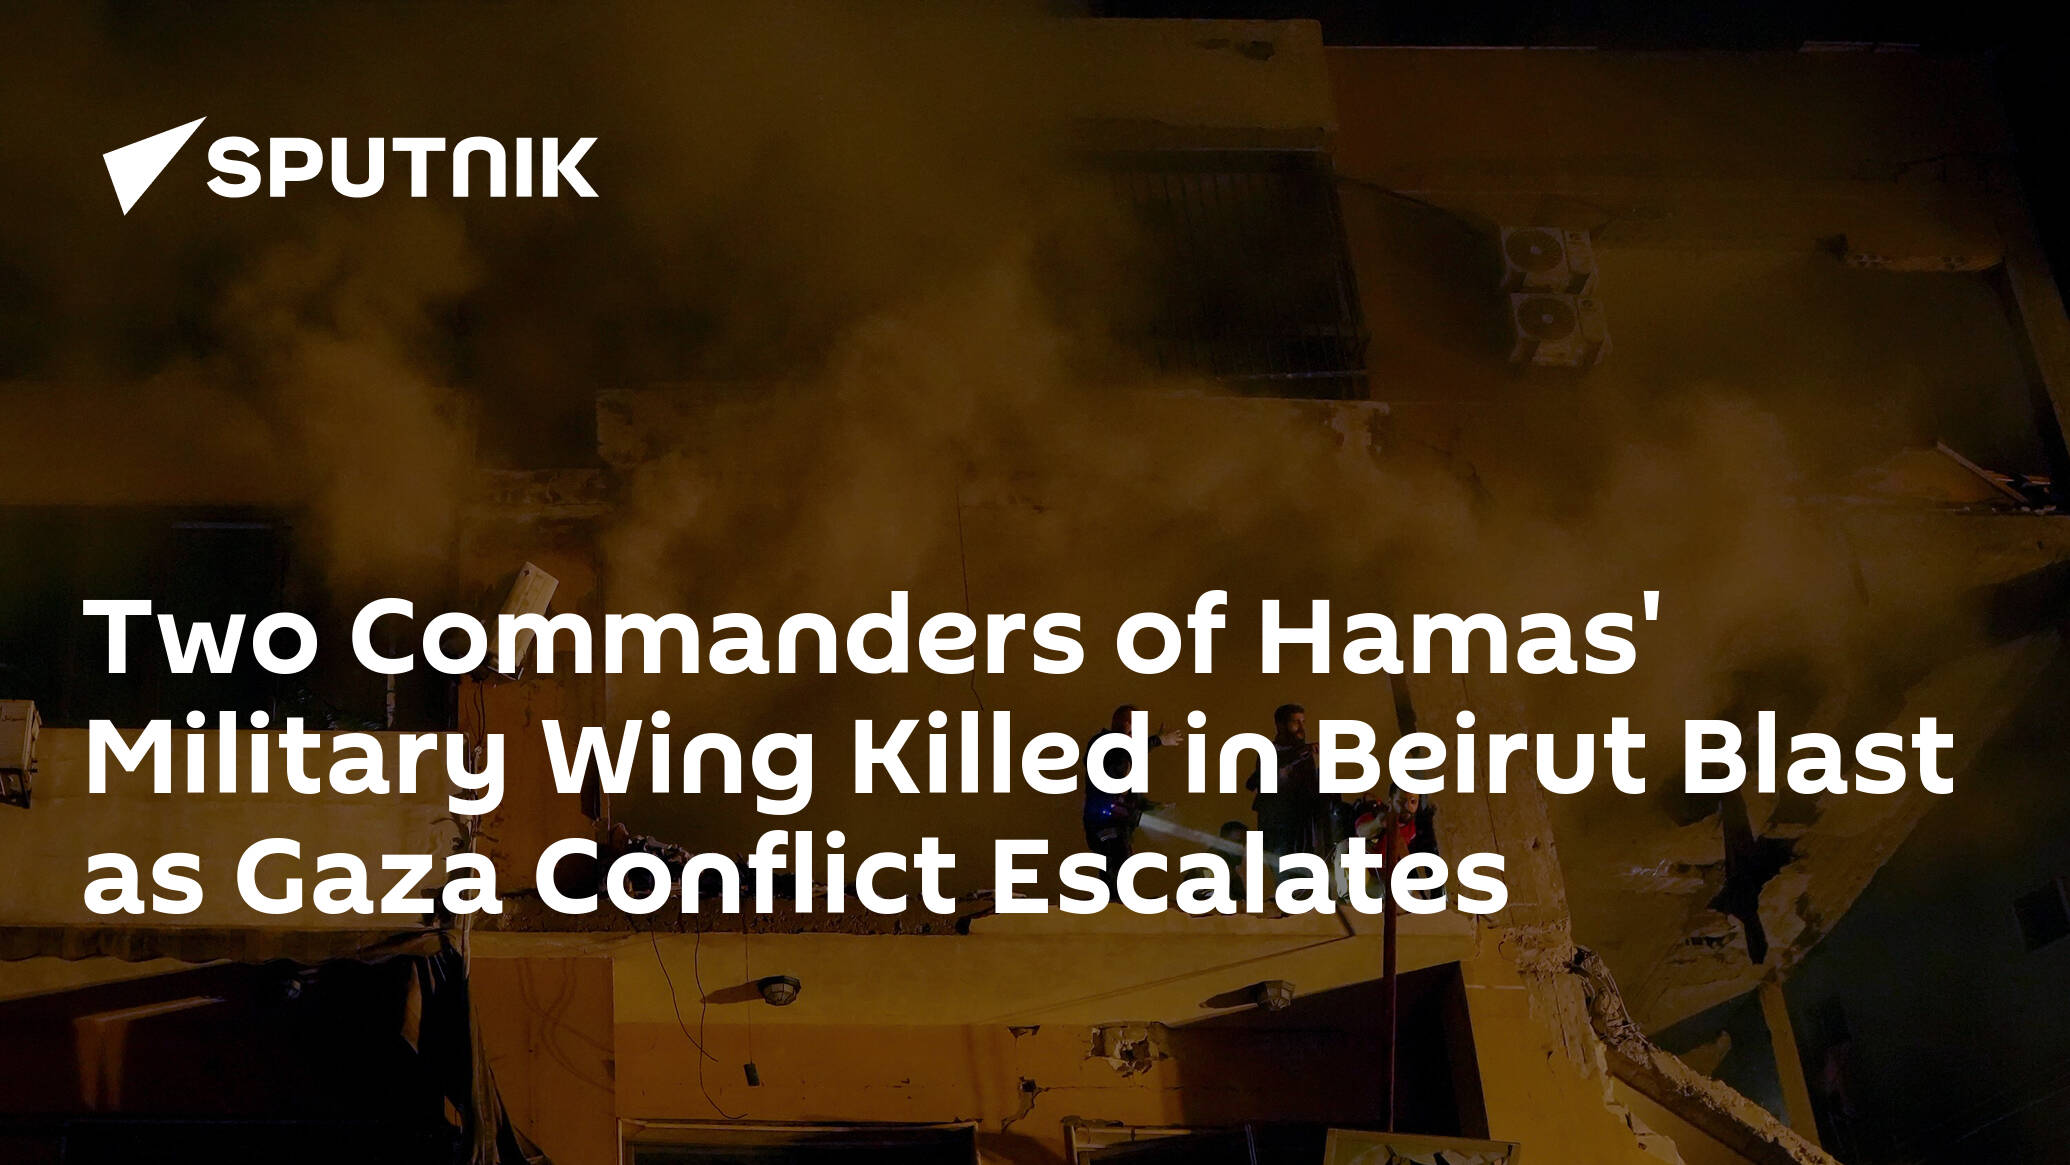 Two Commanders of Hamas' Military Wing Killed in Beirut Blast as Gaza Conflict Escalates